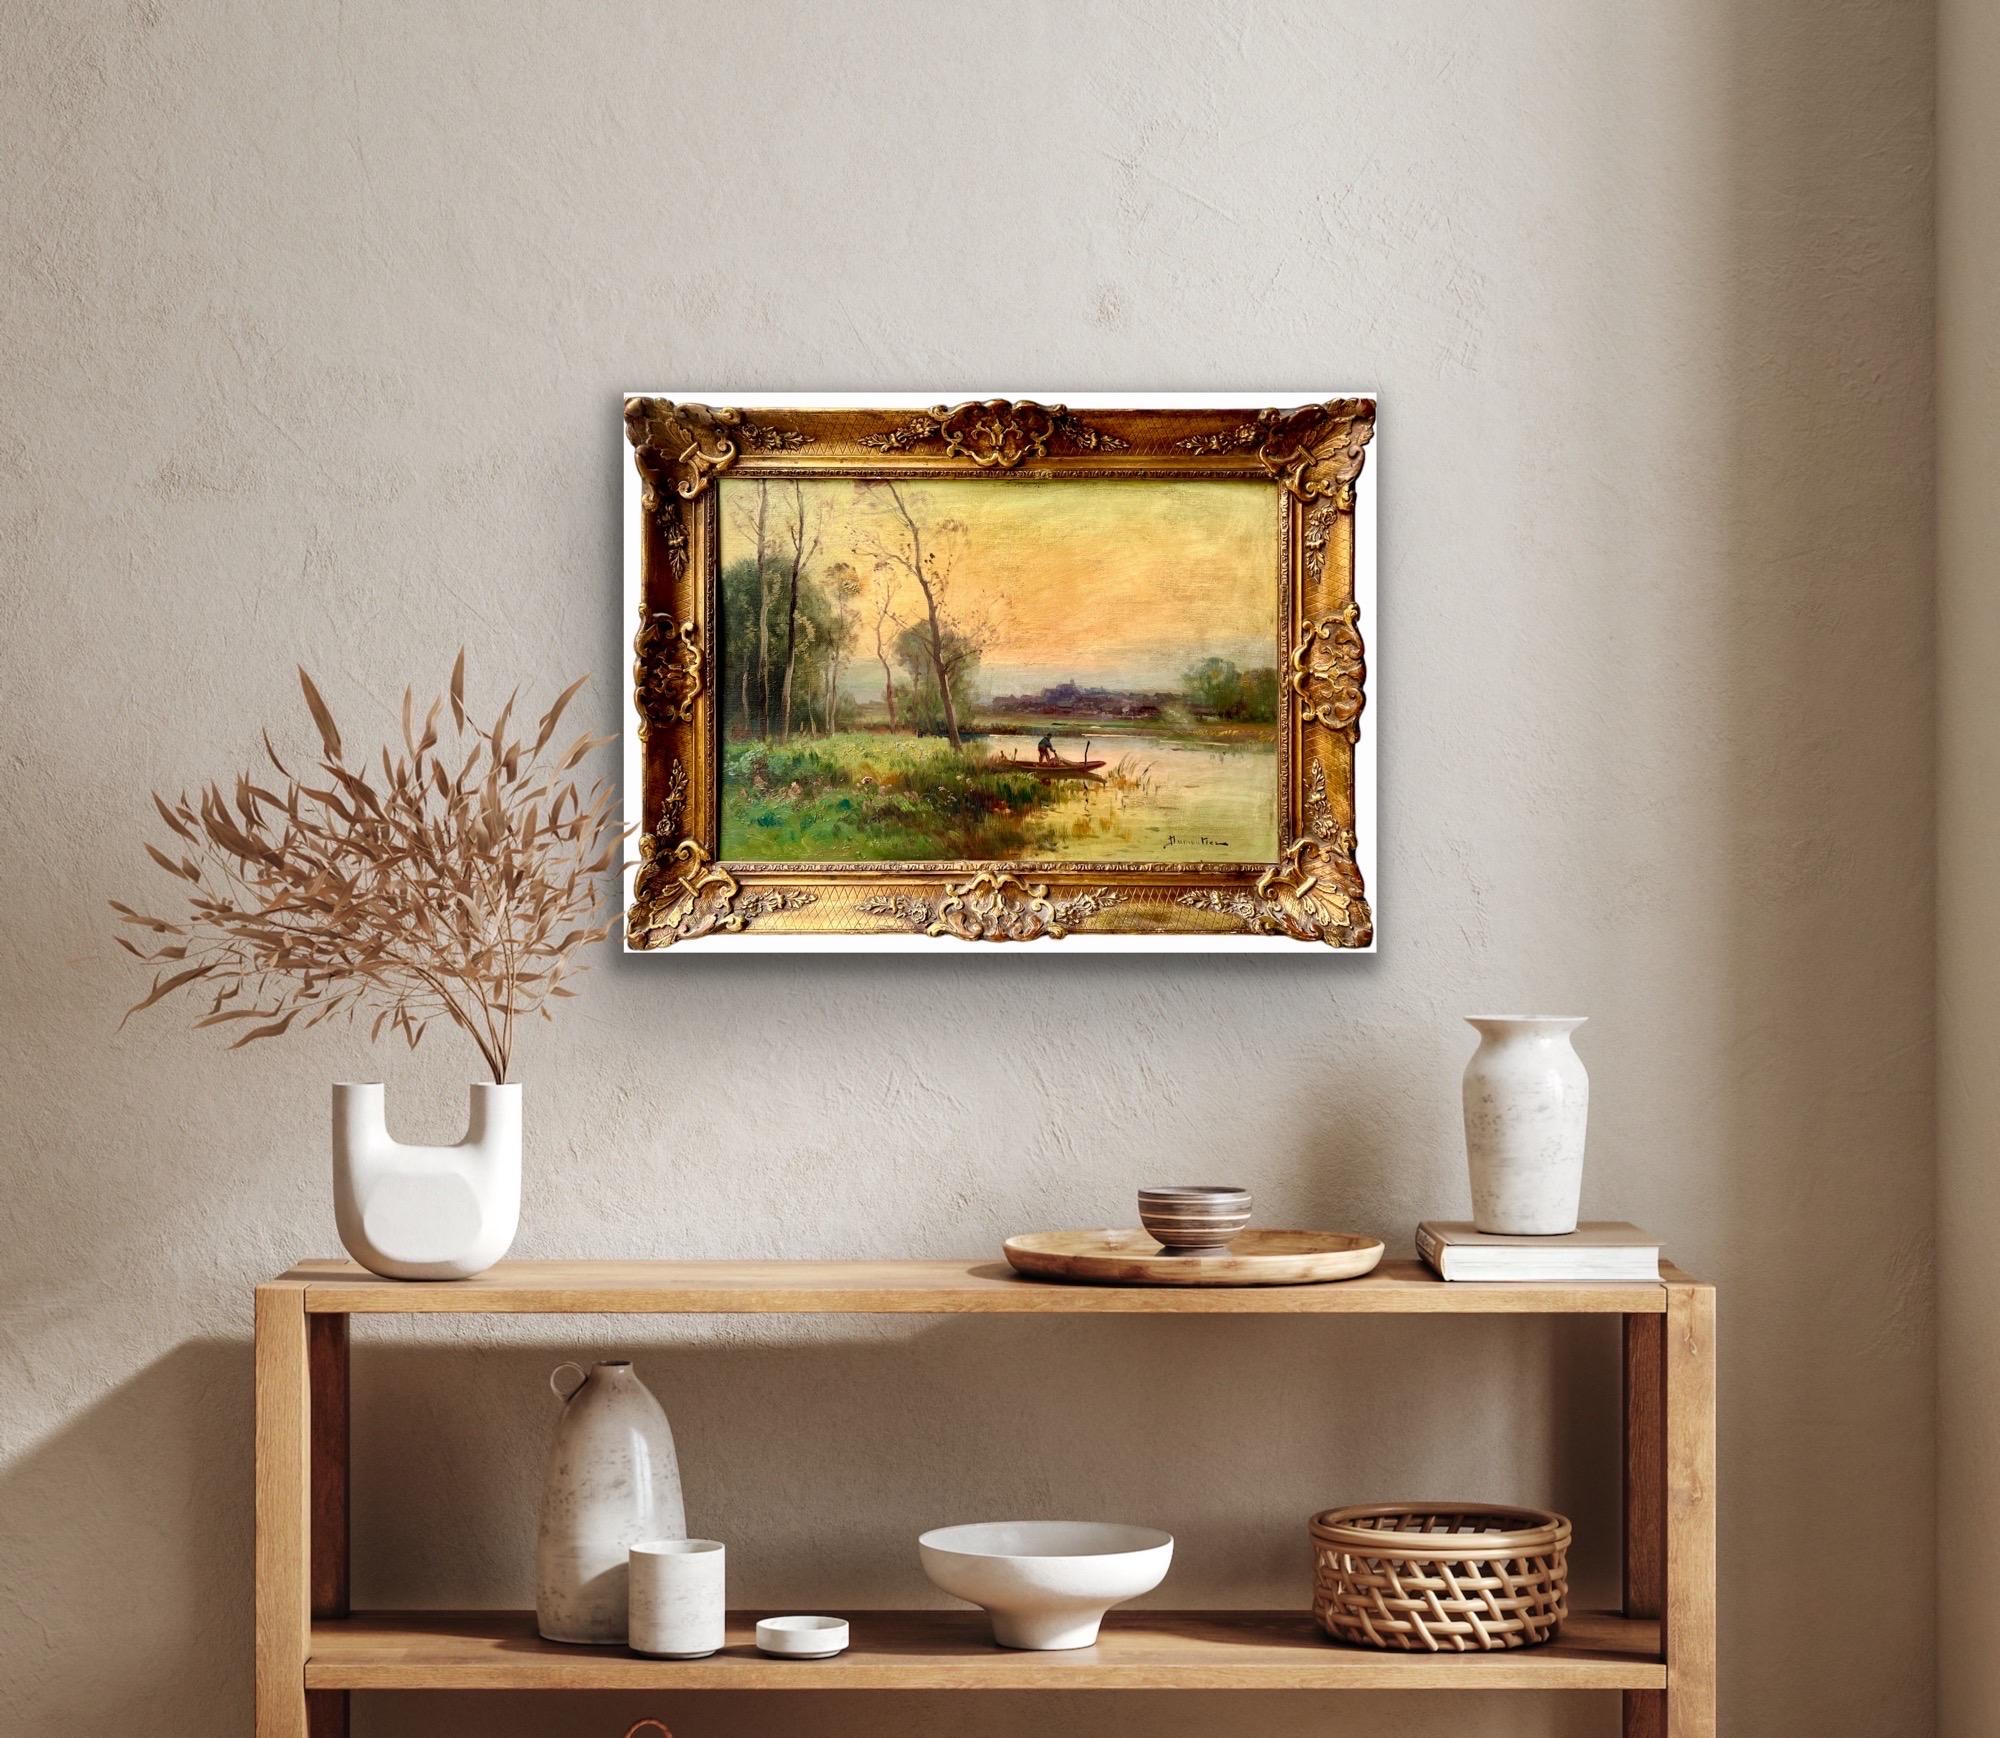 19th century French painting - Fisherman retuning home in a sunset landscape 1